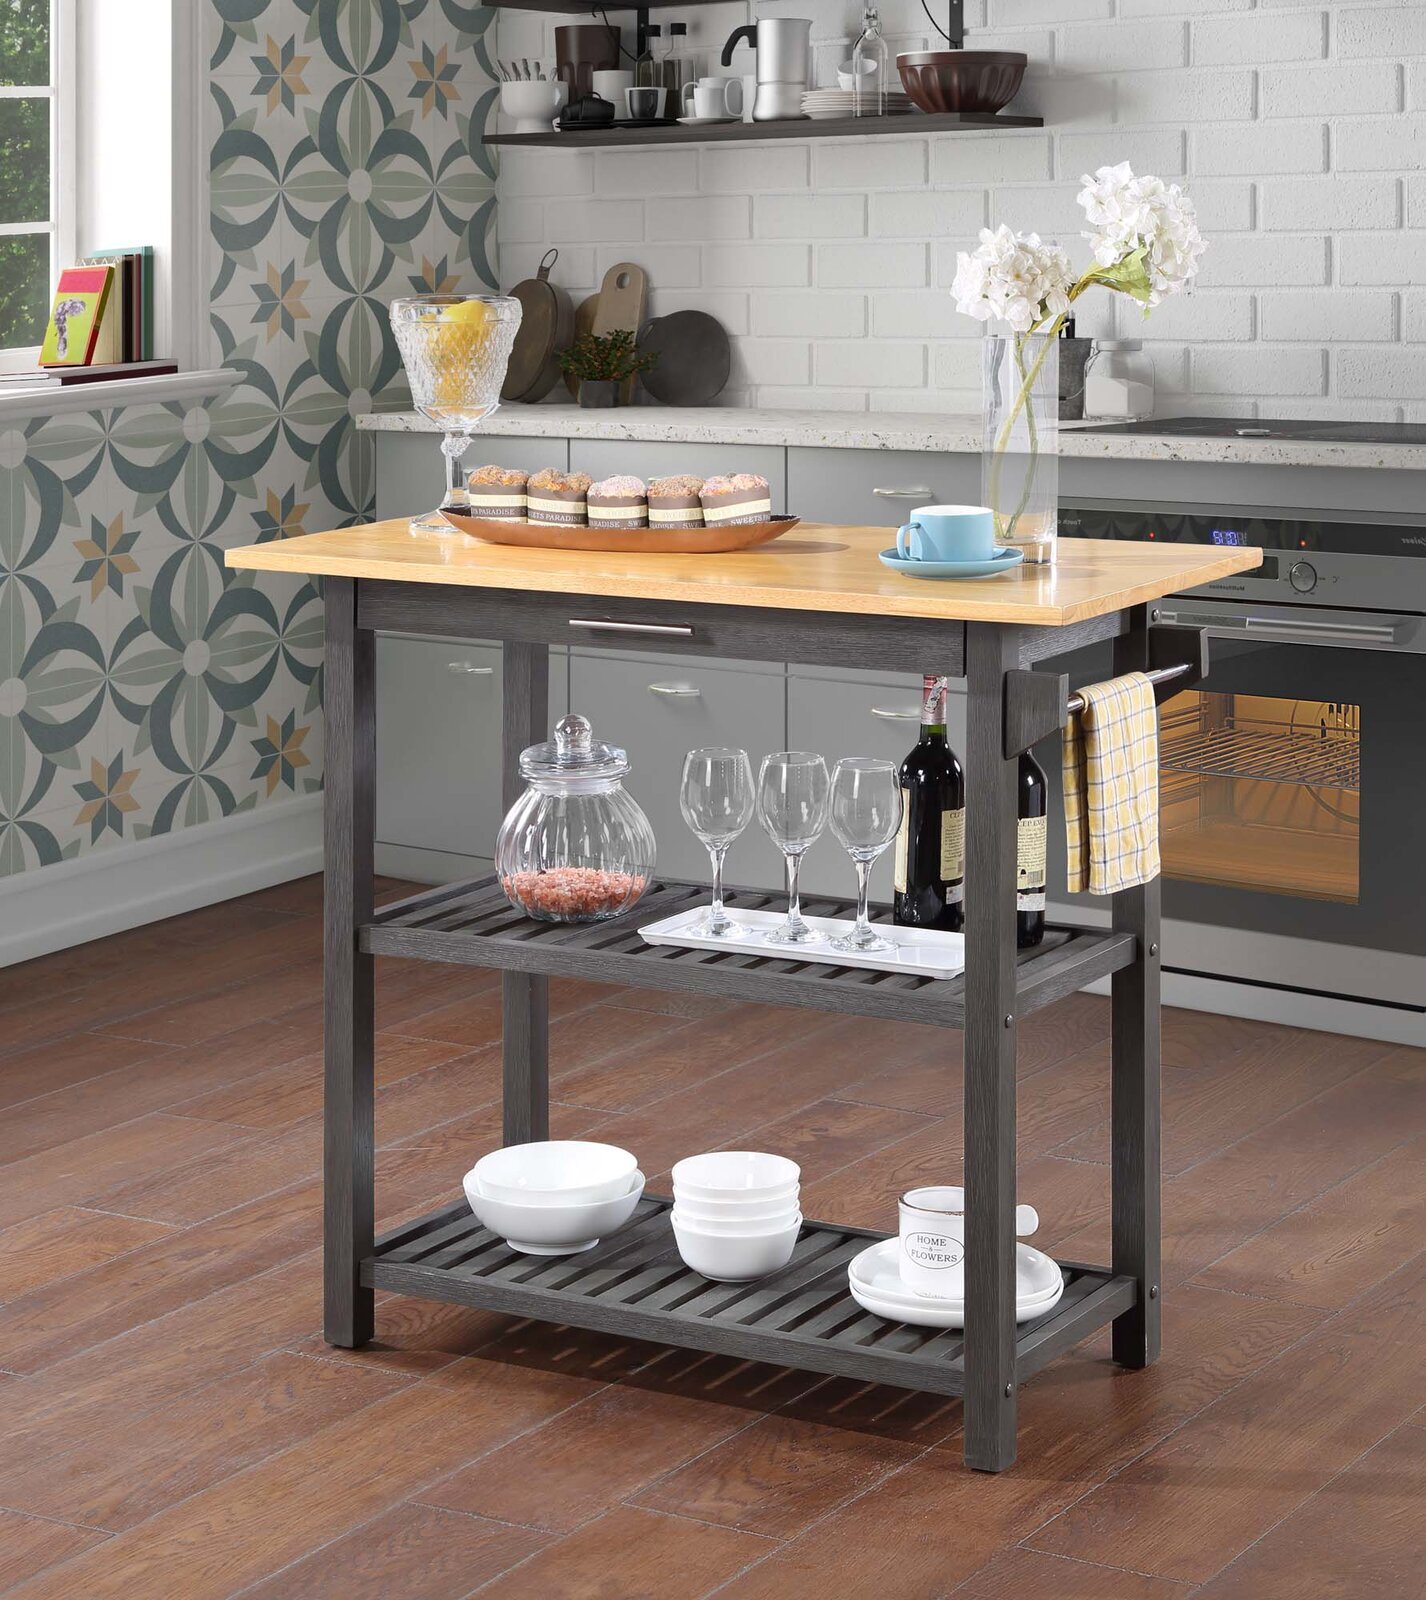 Counter height kitchen prep table with butcher block top